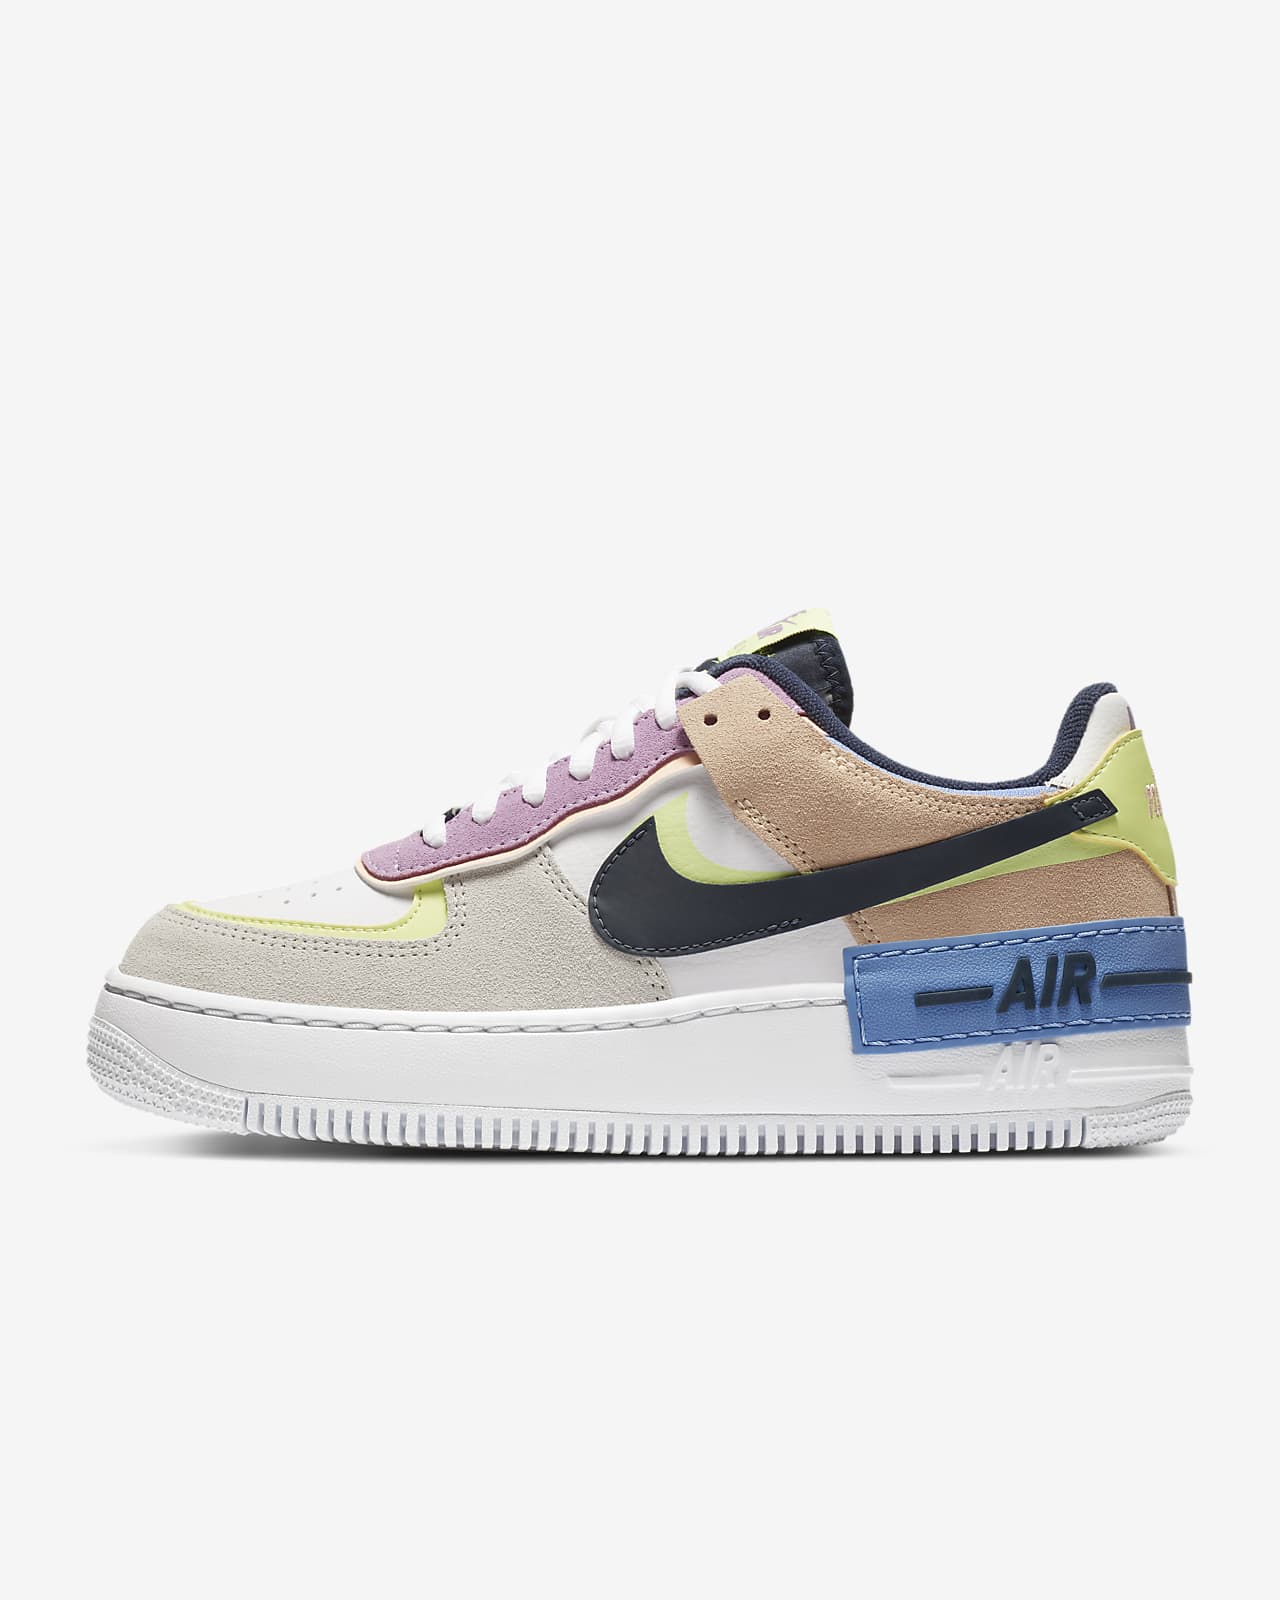 nike air force chile mujer